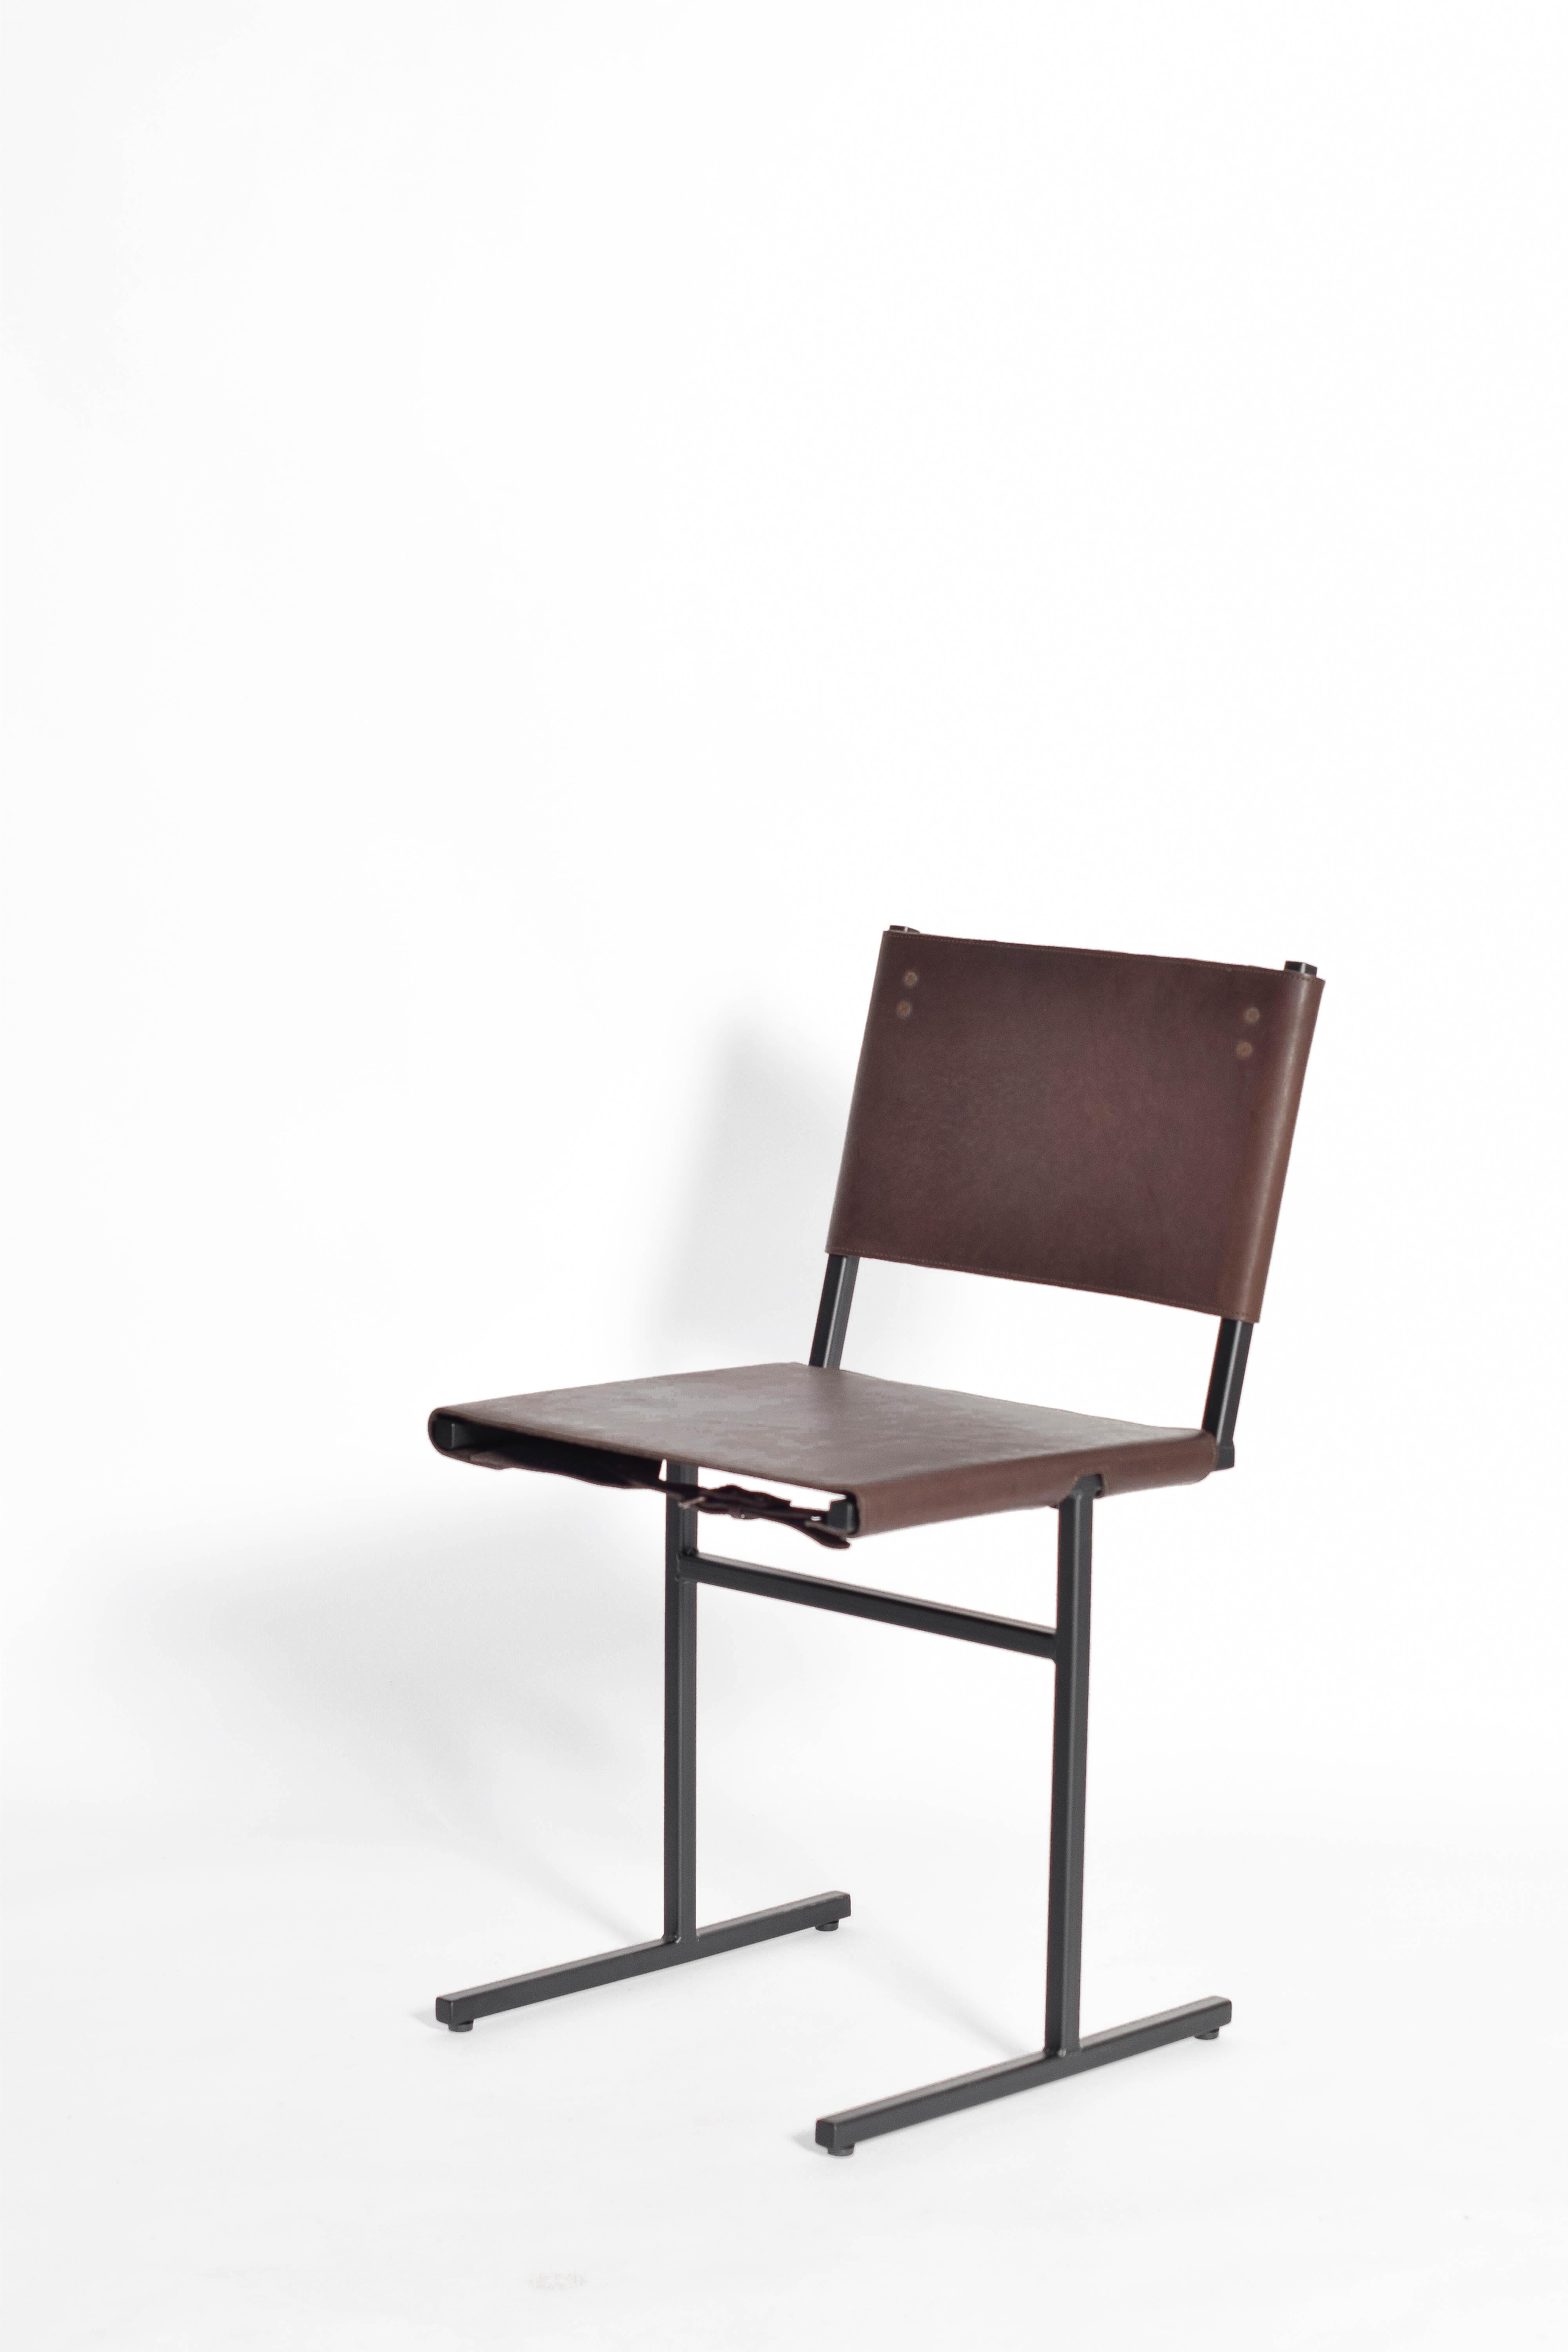 Modern Chocolate and Black Memento Chair, Jesse Sanderson For Sale